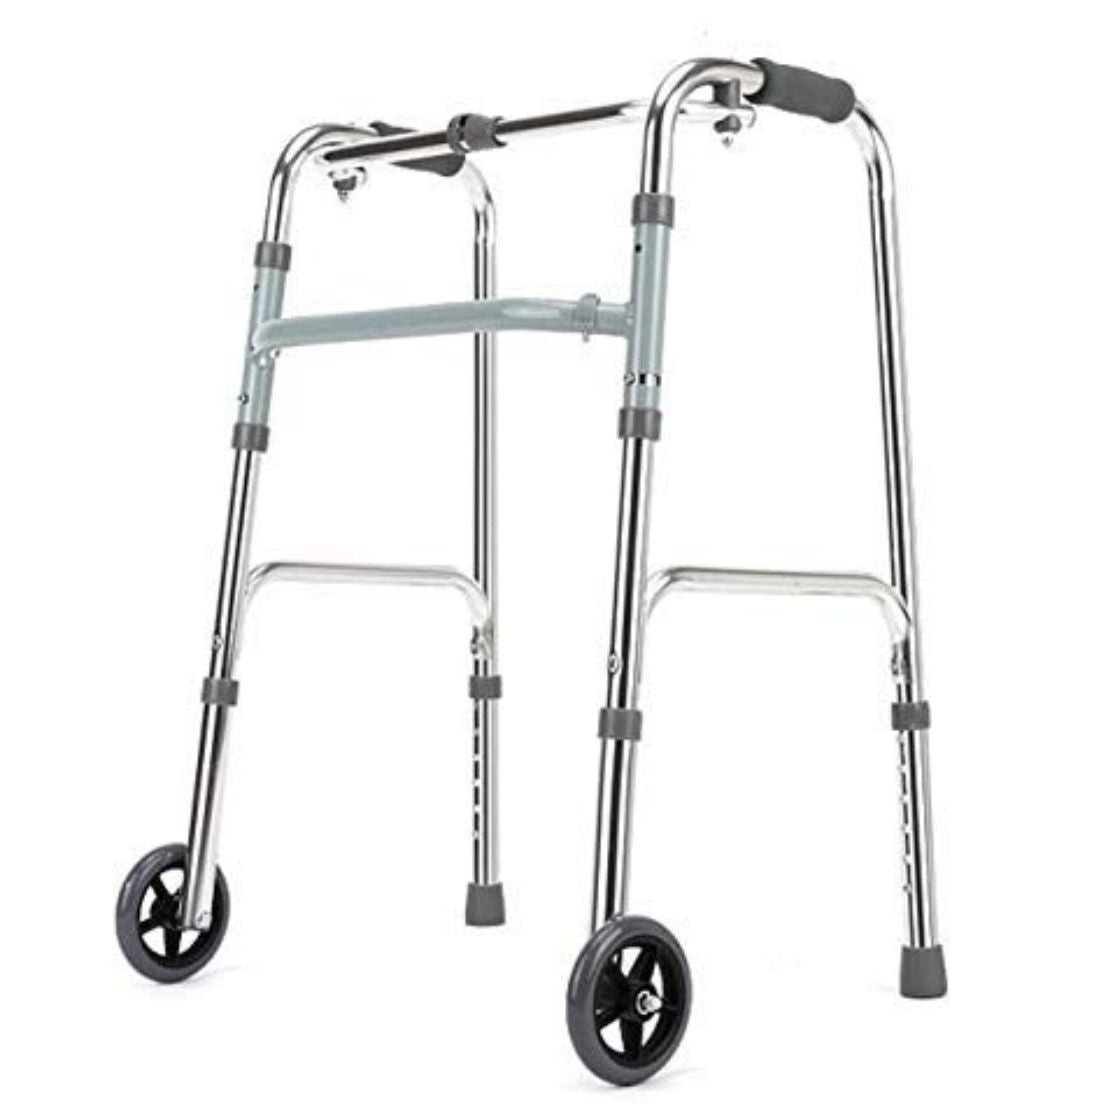 Uphealthy Folding Walker With Wheels is used for Individuals who struggle with their balance use a wheeled walker to help them move or walk around